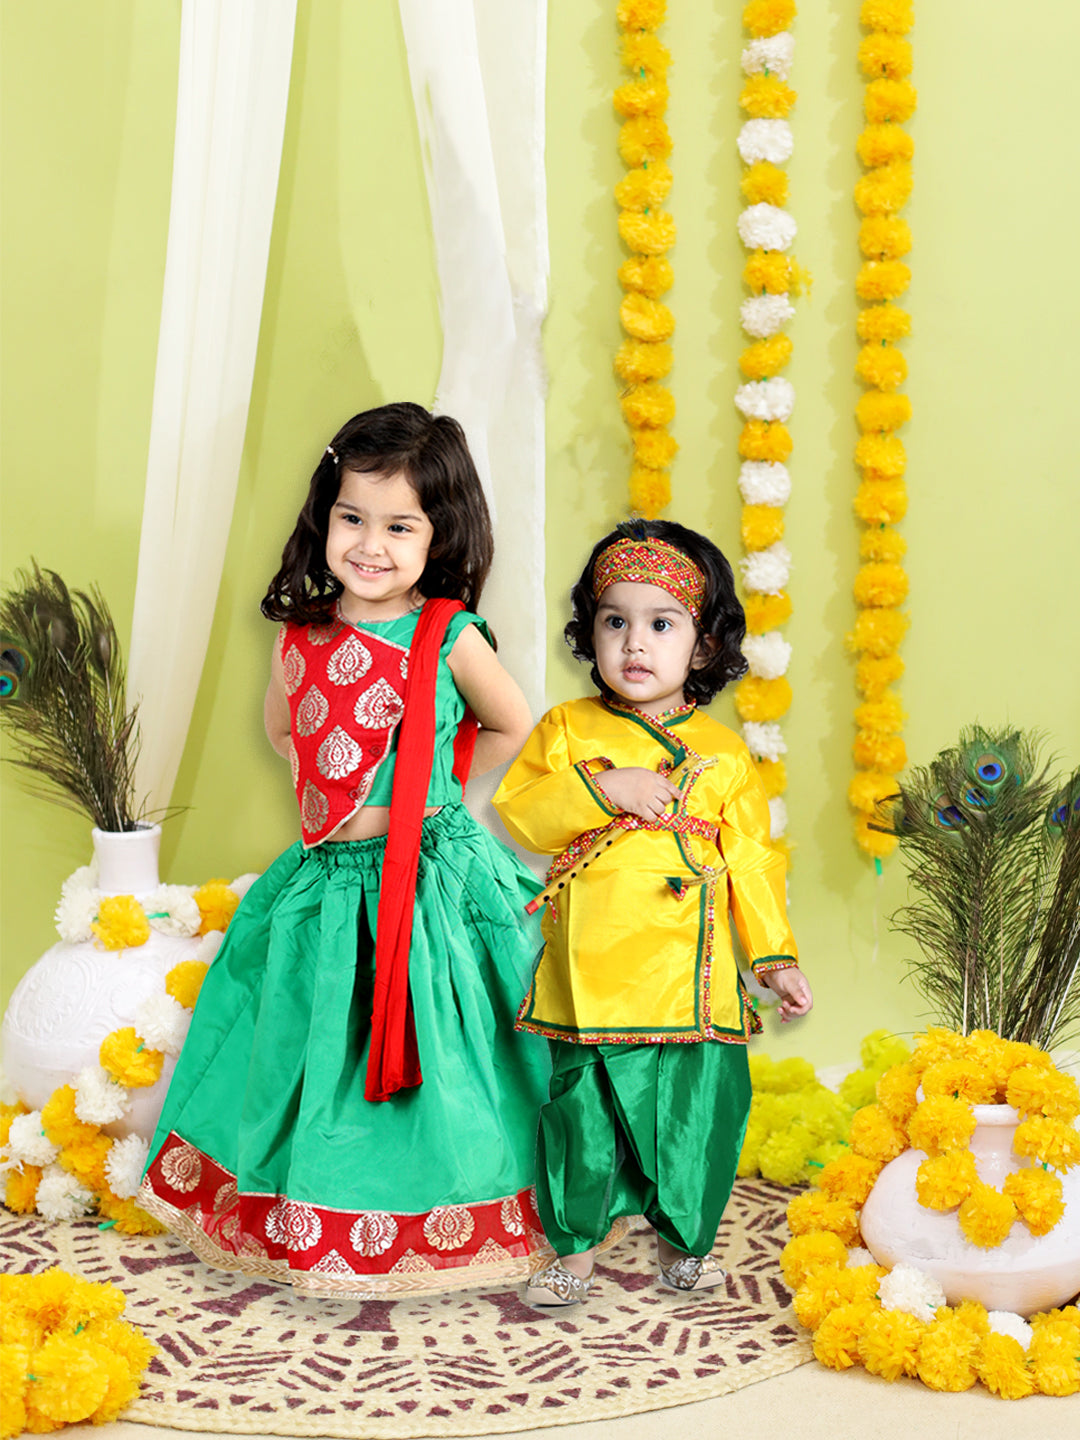 BownBee Sibling little Kanhiya suit and round panel printed Lehenga with Dupatta-Green